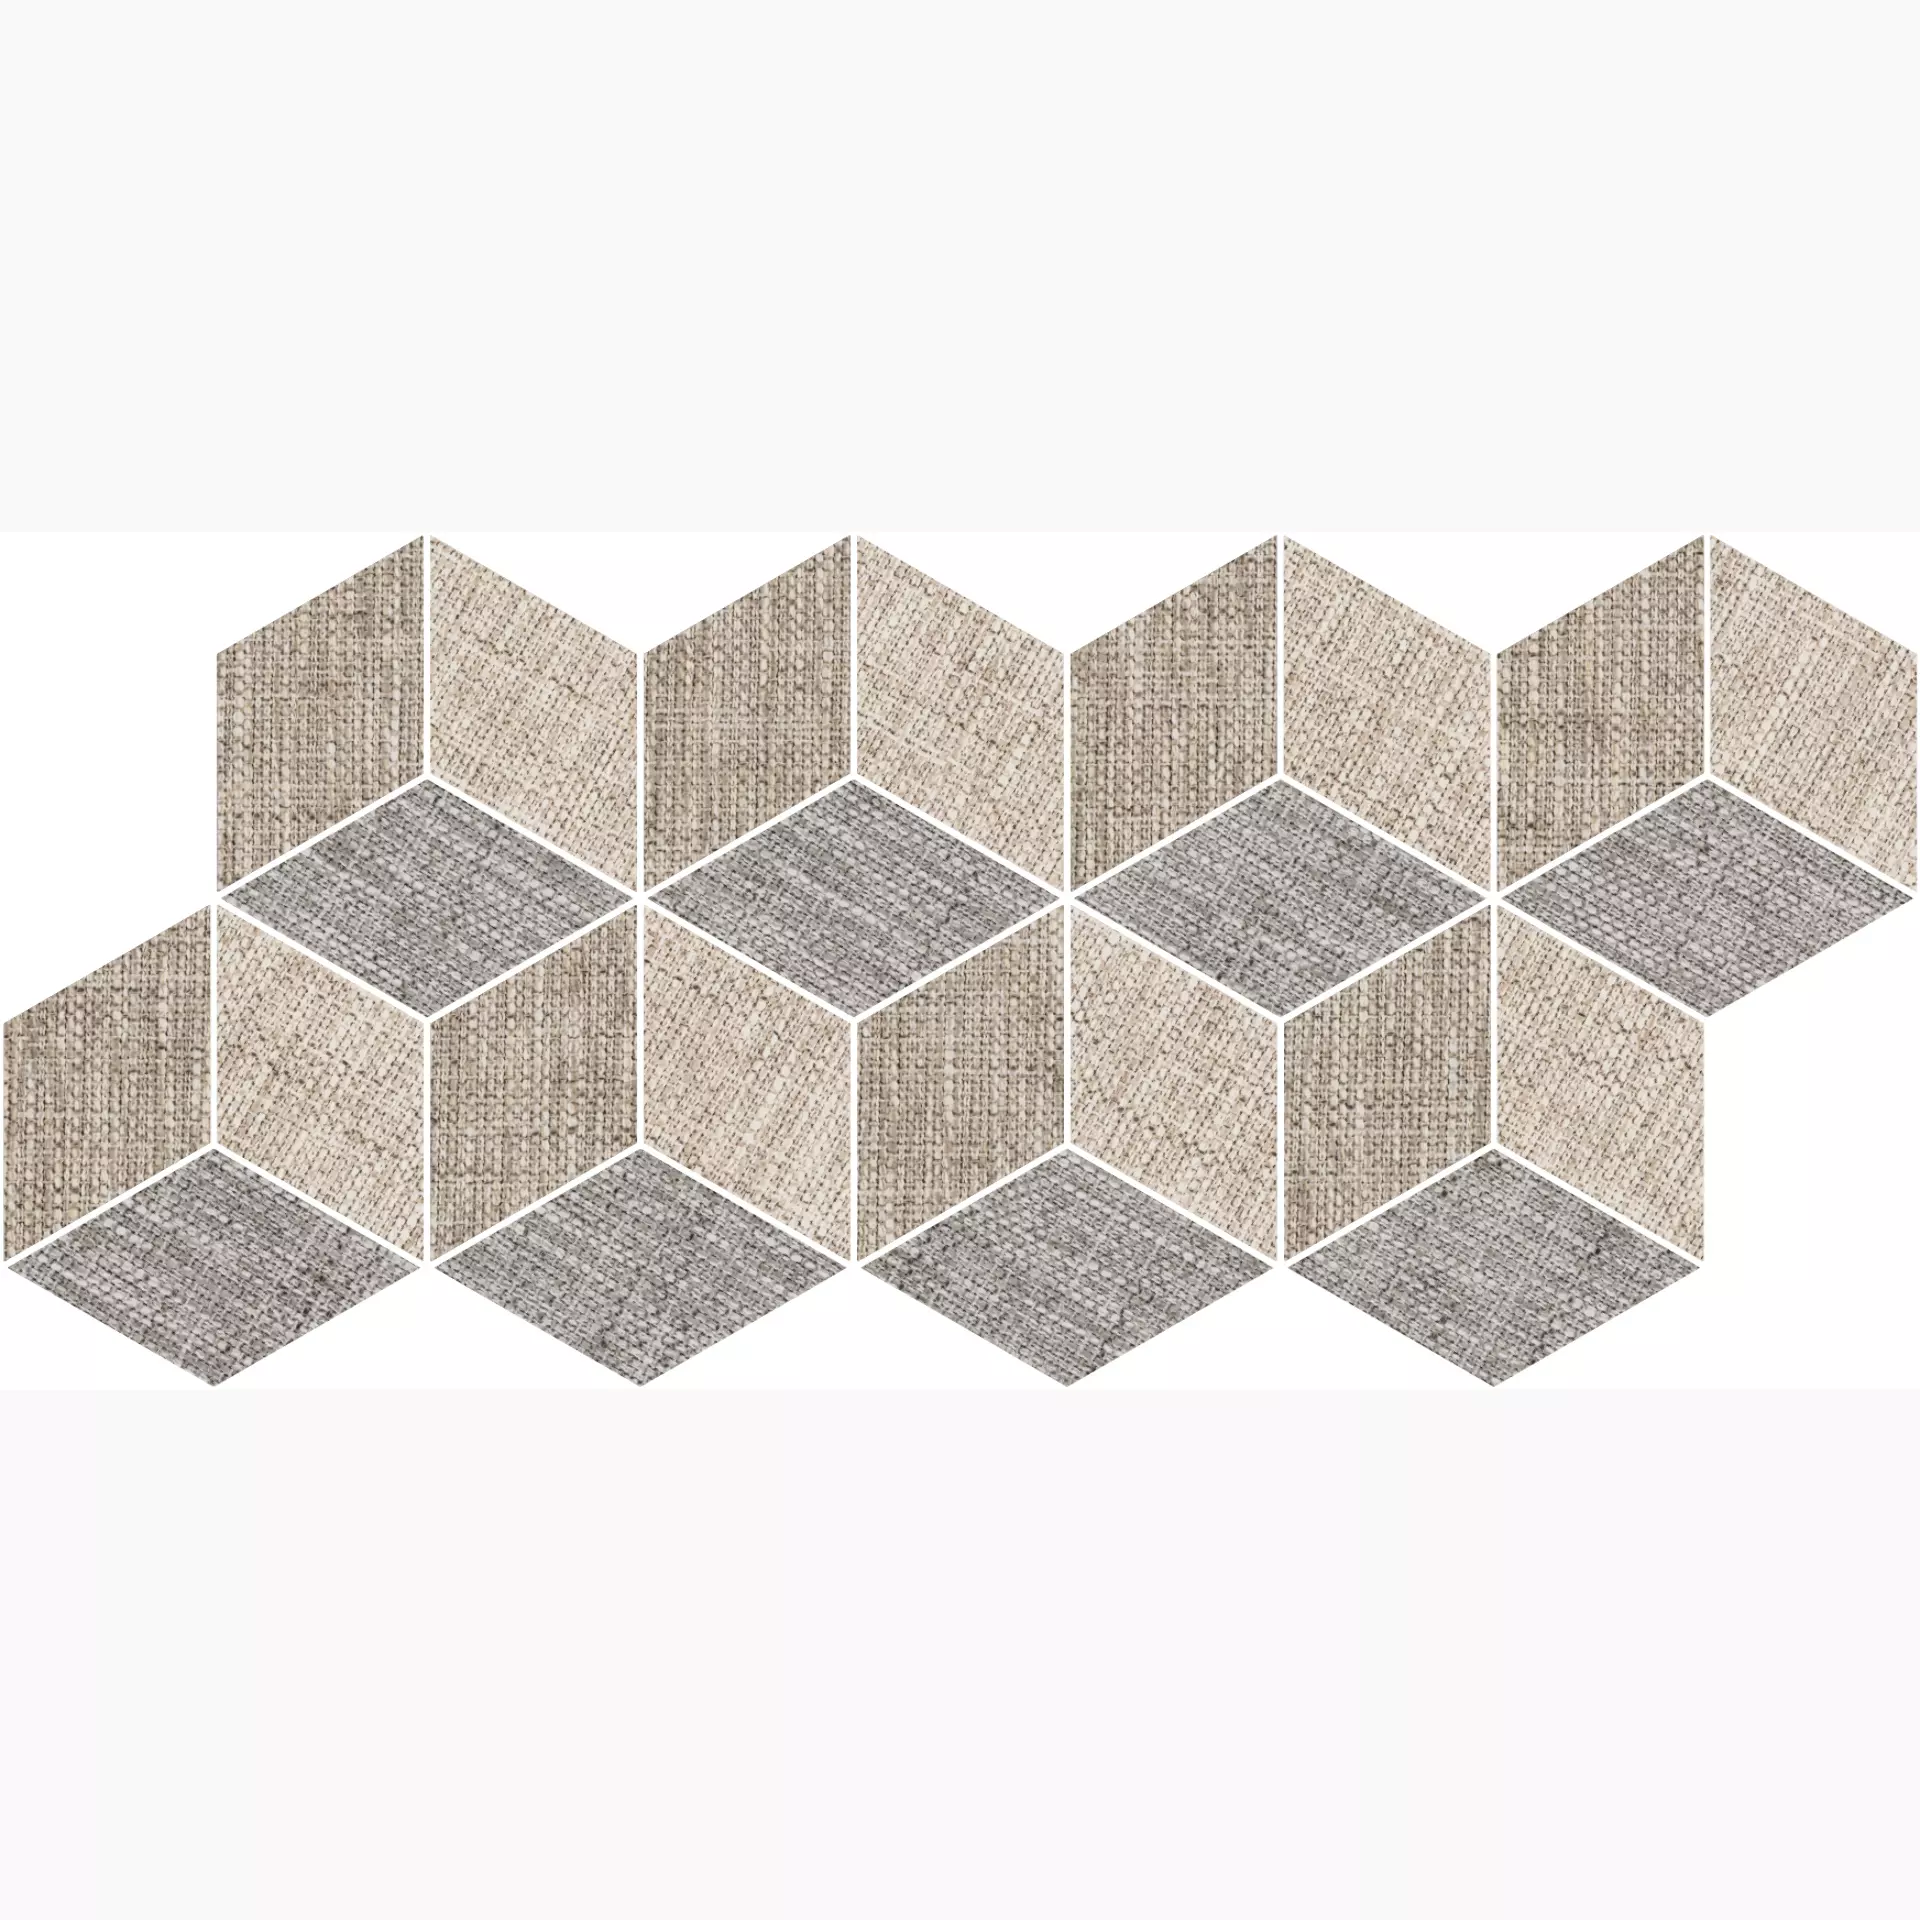 Sant Agostino Fineart Dark Natural Hexagon Mix CSAEXFMD01 20x46cm rectified 10mm